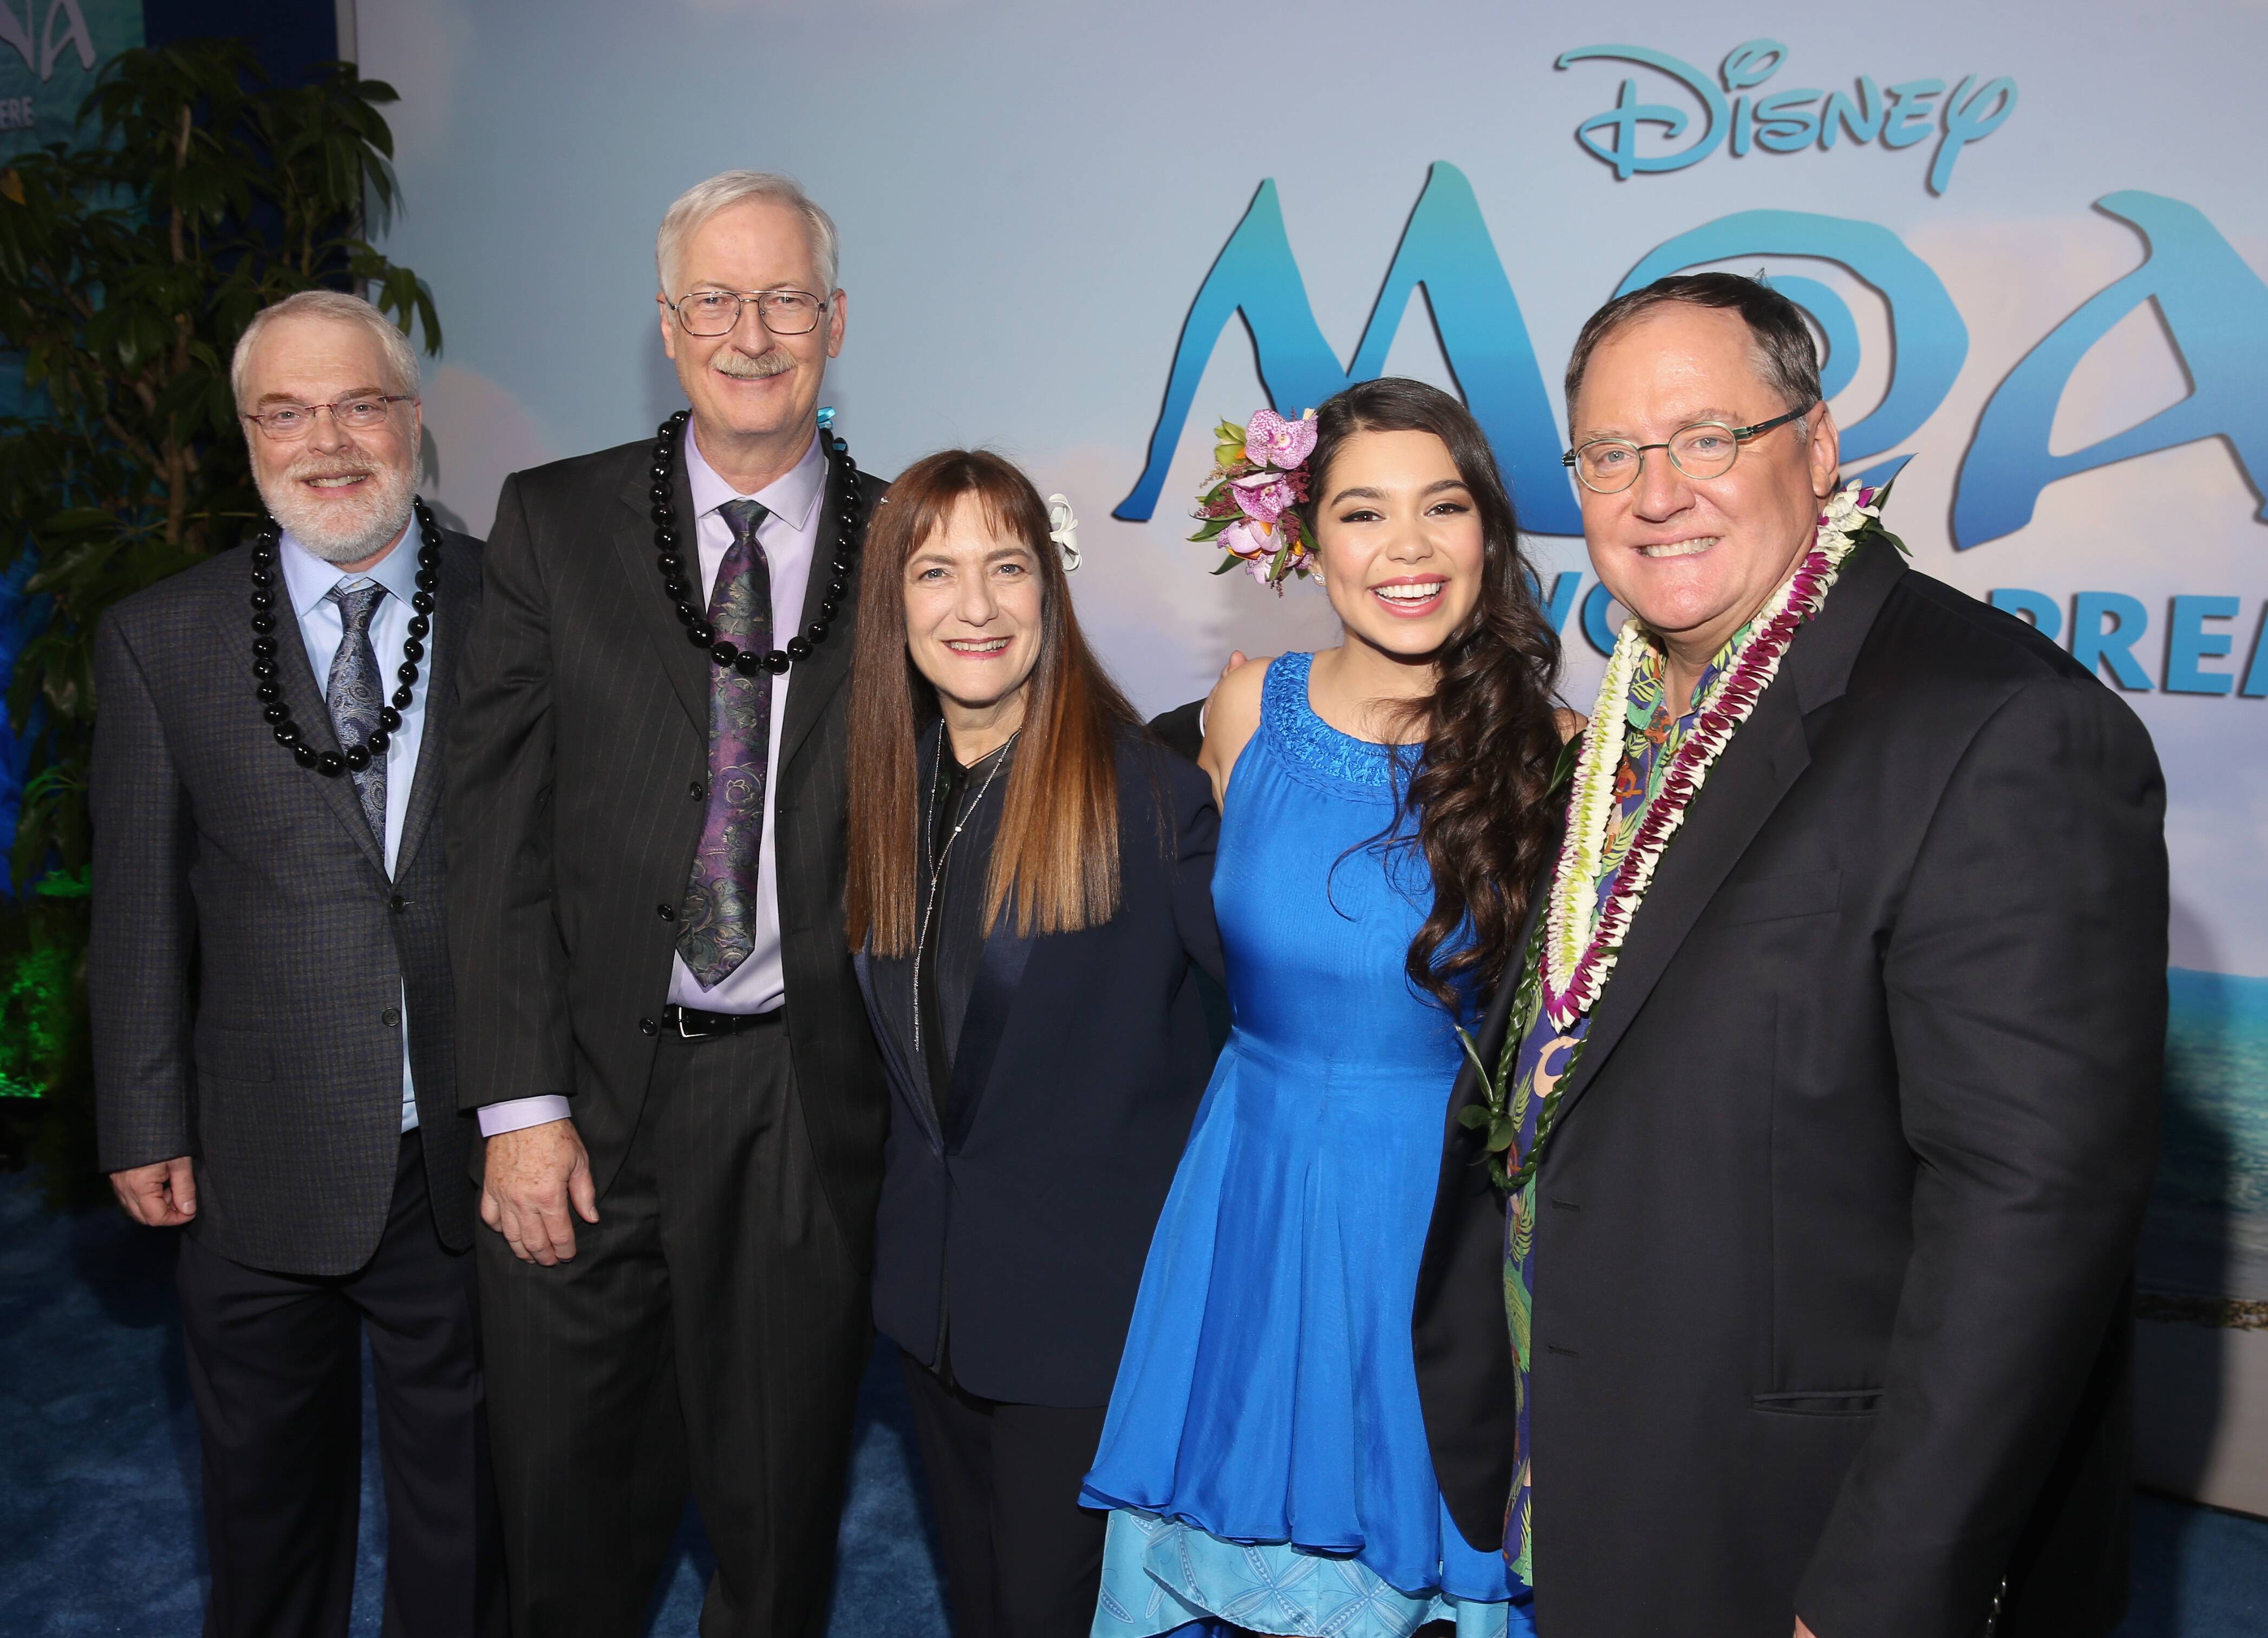 HOLLYWOOD, CA - NOVEMBER 14: (L-R) Directors Ron Clements and John Musker, producer Osnat Shurer, actress Auli'i Cravalho, and executive producer John Lasseter attend The World Premiere of Disneys "MOANA" at the El Capitan Theatre on Monday, November 14, 2016 in Hollywood, CA. (Photo by Jesse Grant/Getty Images for Disney) *** Local Caption *** Auli'i Cravalho; John Lasseter; John Musker; Ron Clements; Osnat Shurer